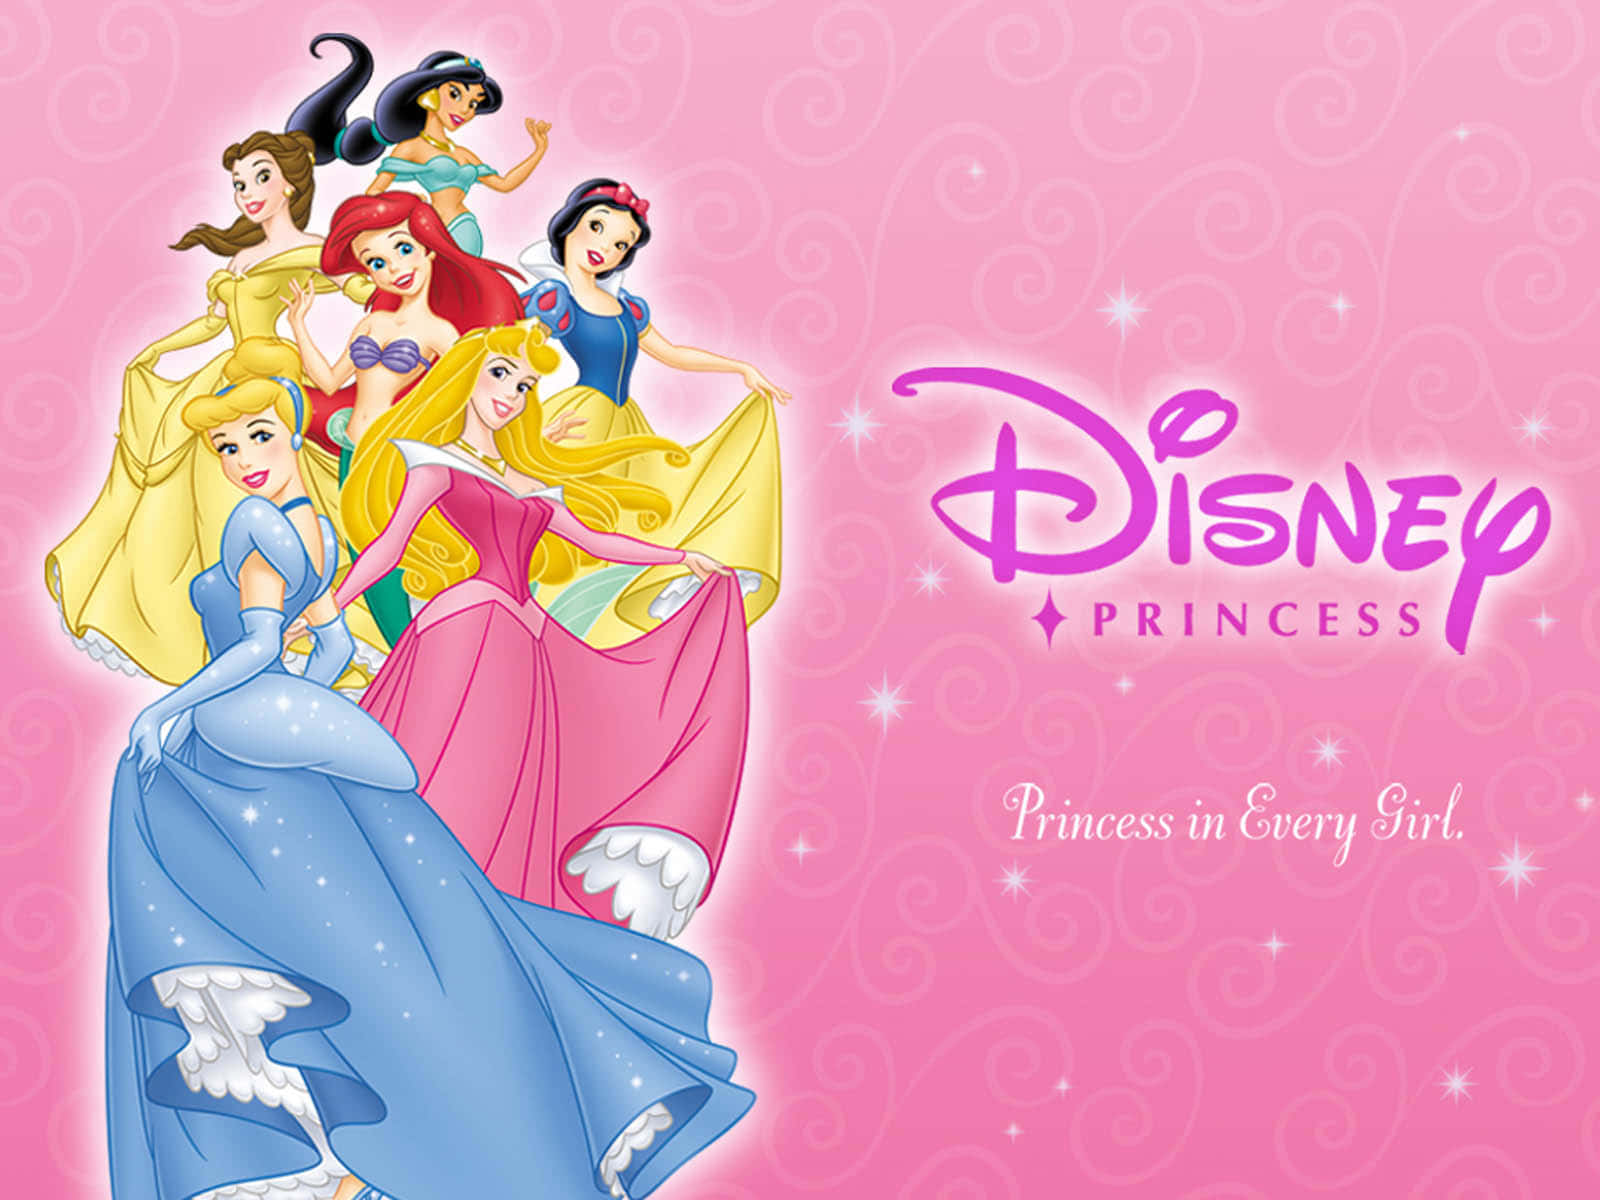 Classic Disney Princesses all in one place!